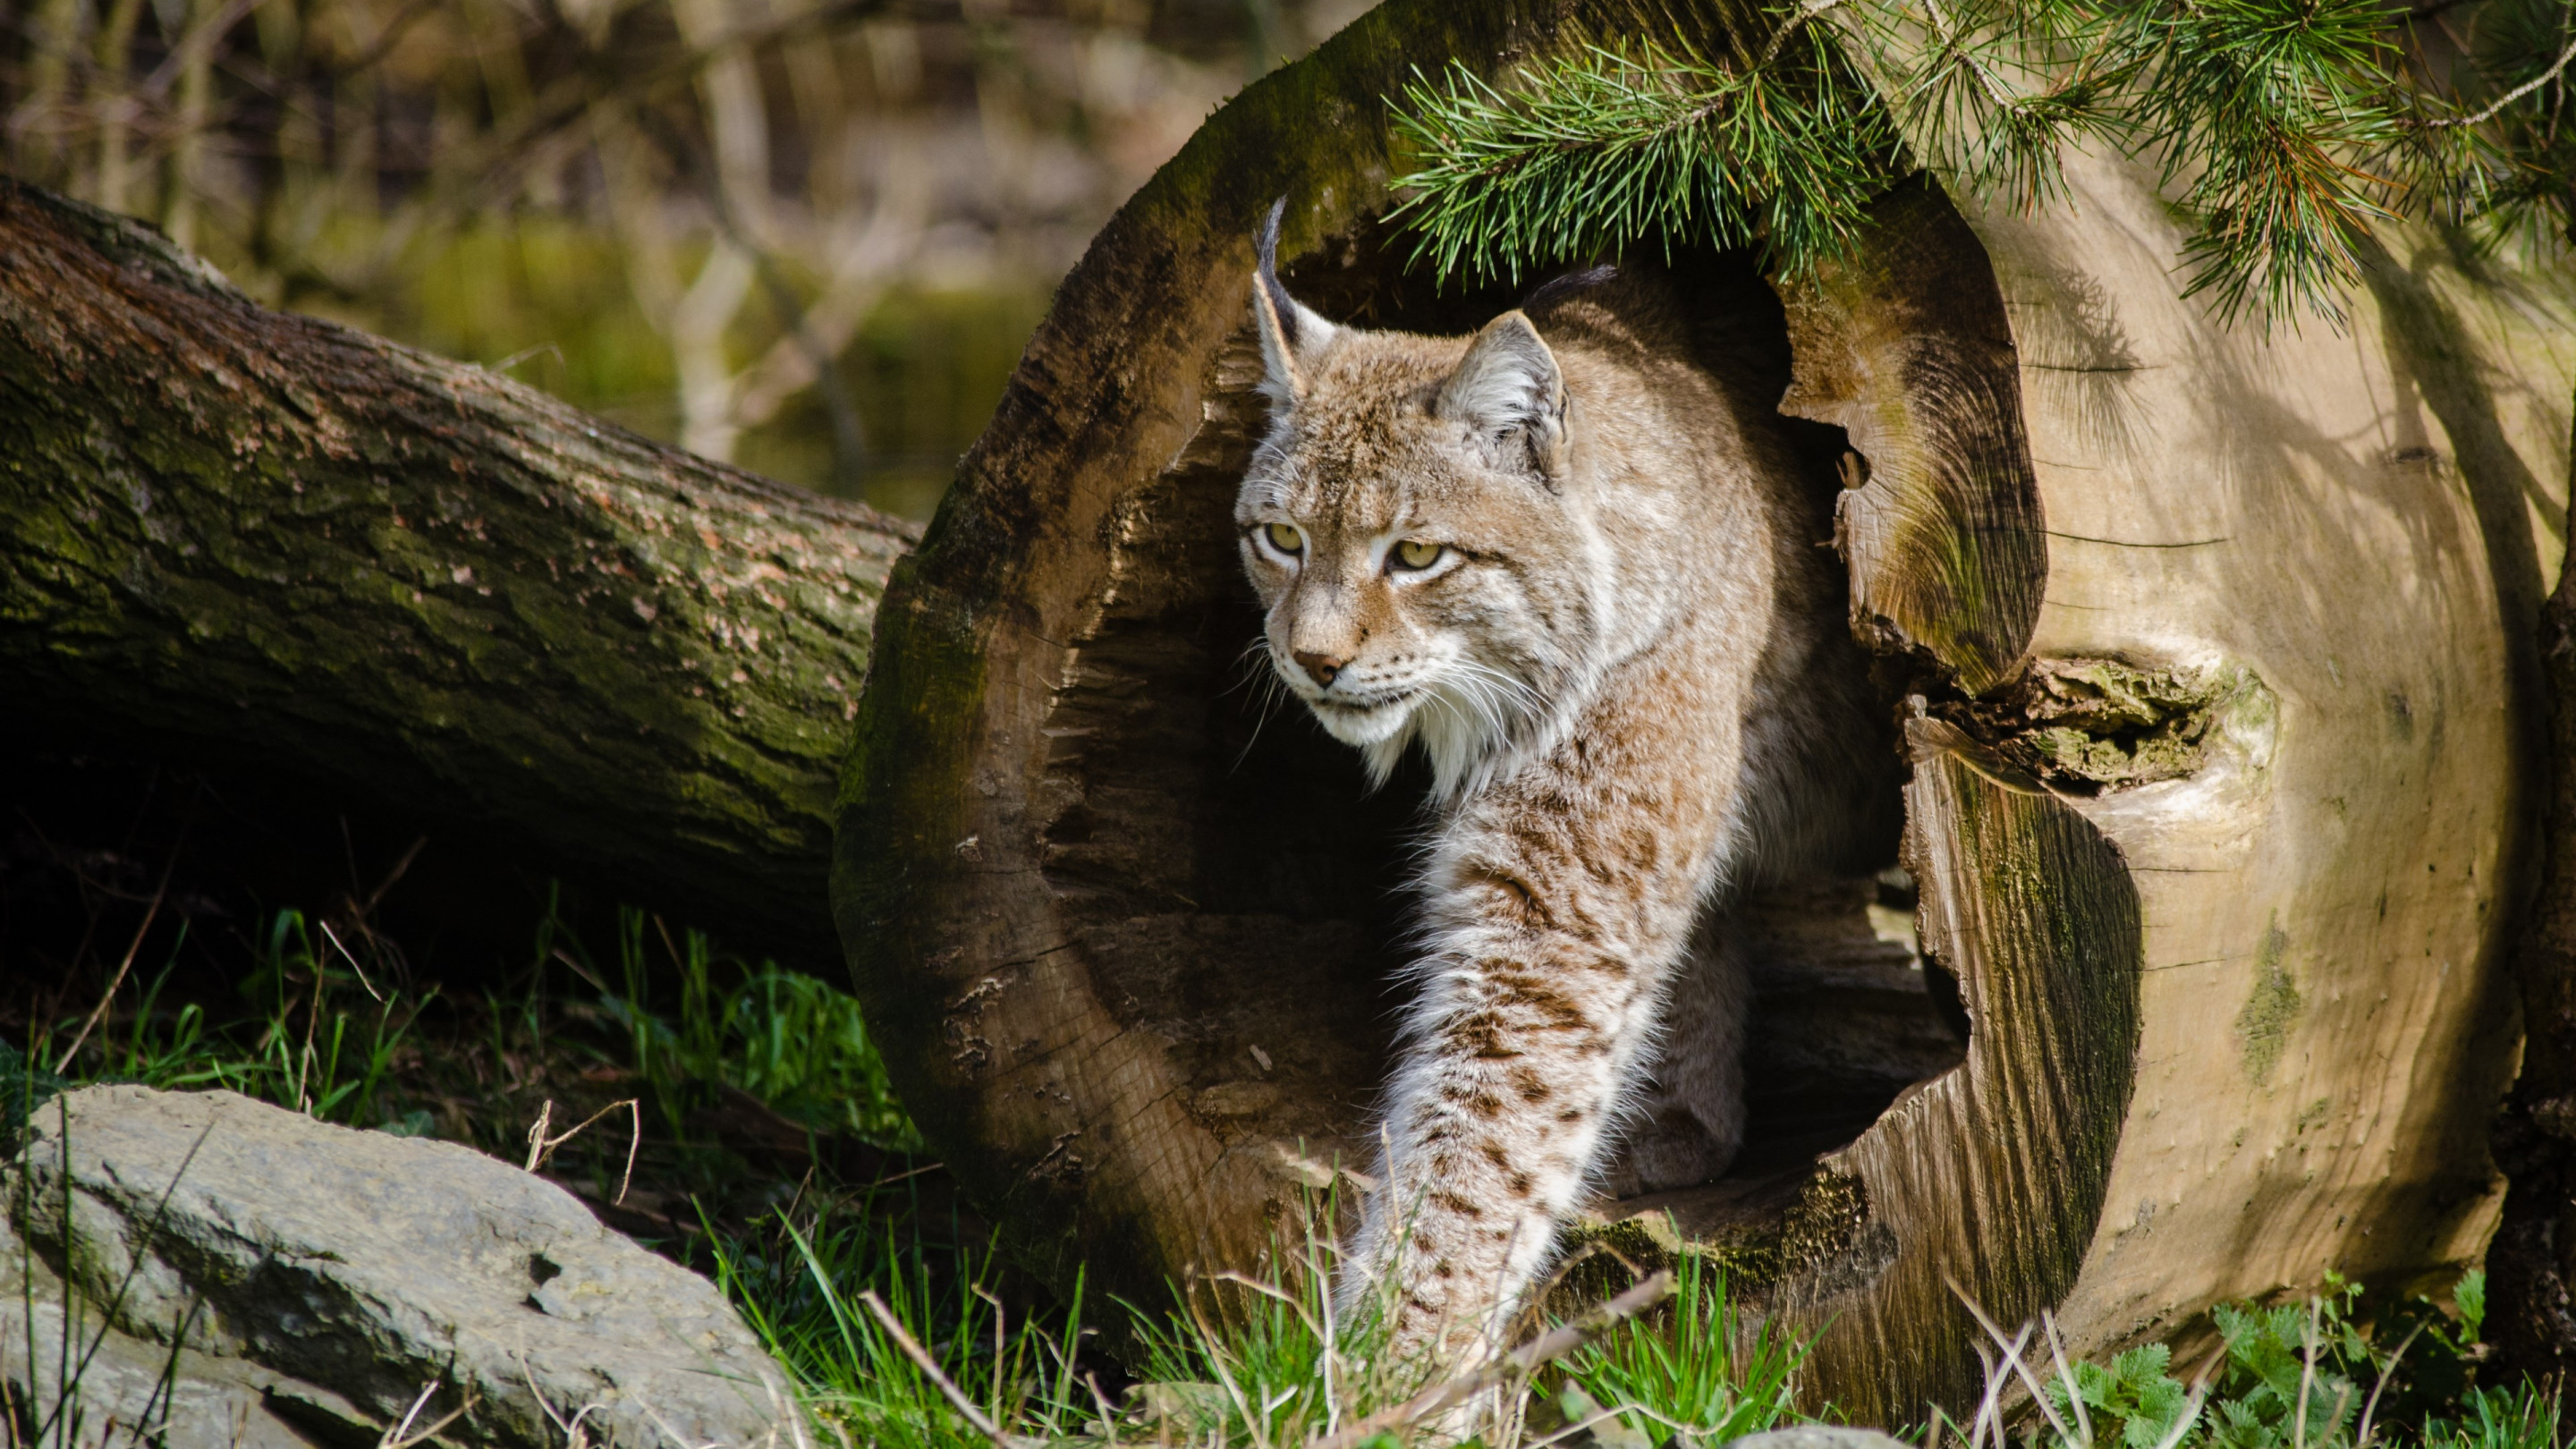 Lynx at the Zoo wallpaper 2880x1620